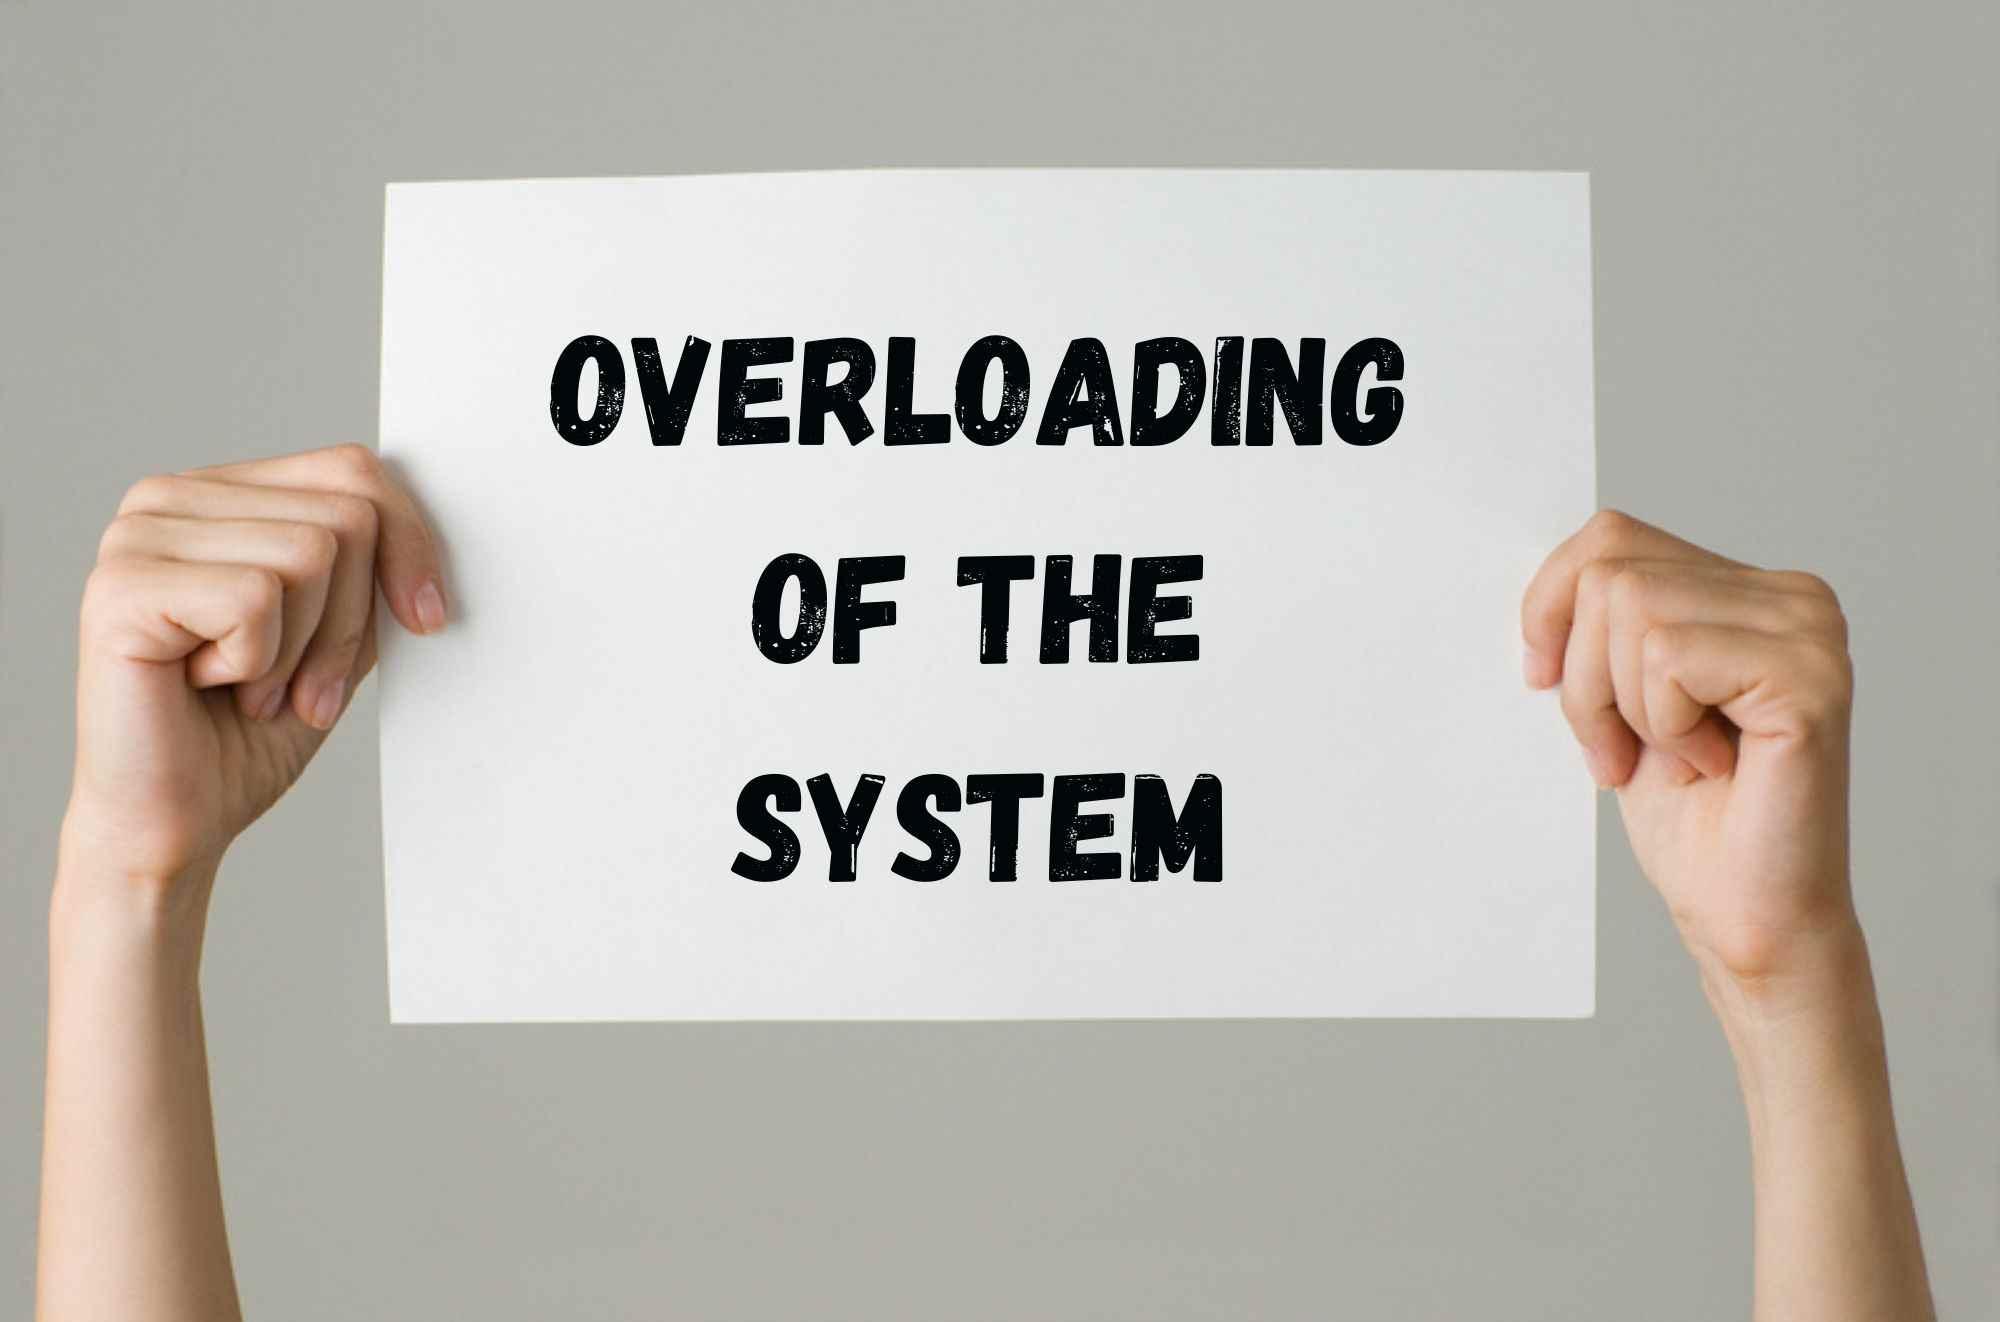 Overloading of the system